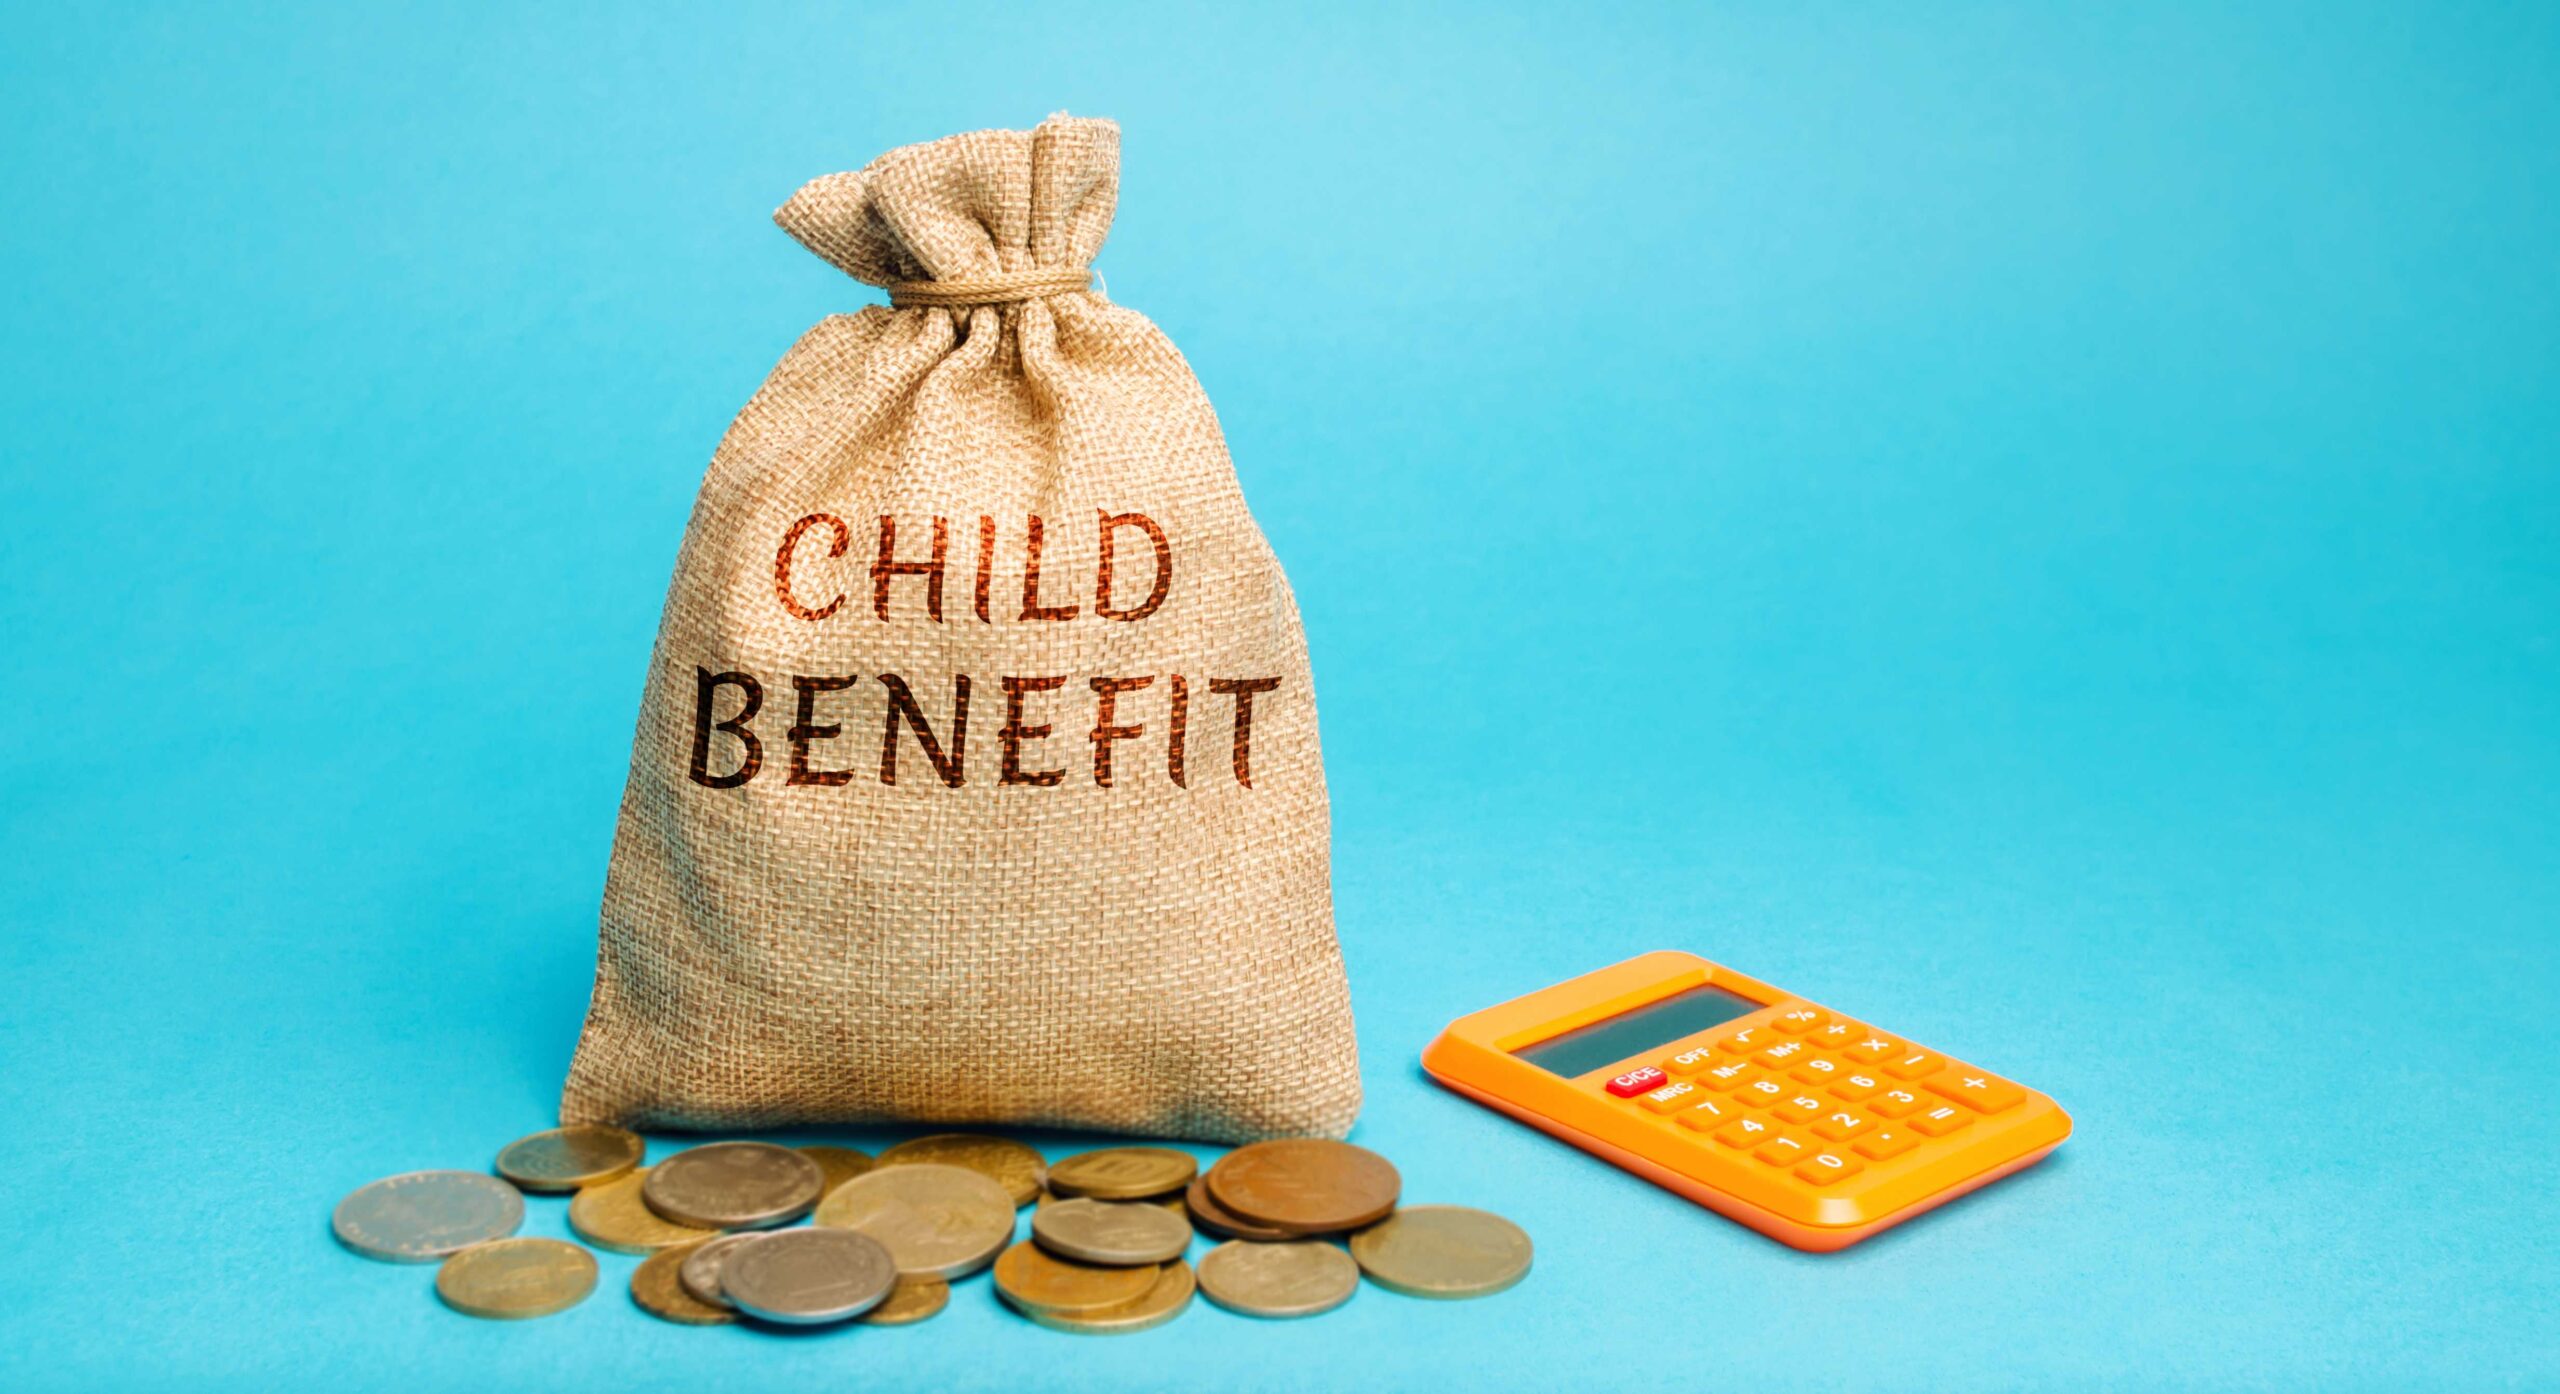 The child benefit tax rule changes